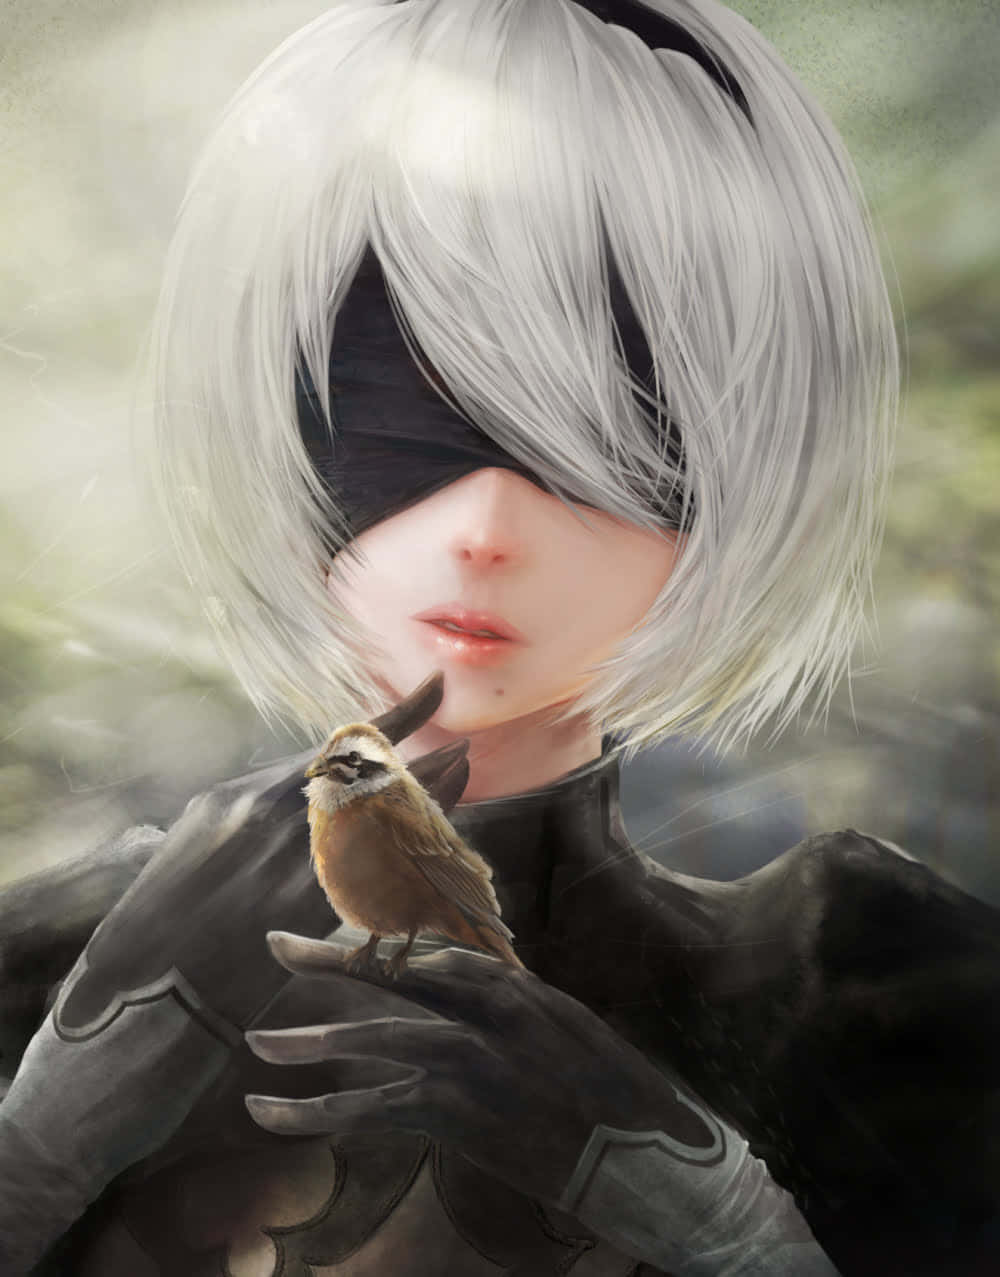 2b, the courageous soldier on a mission